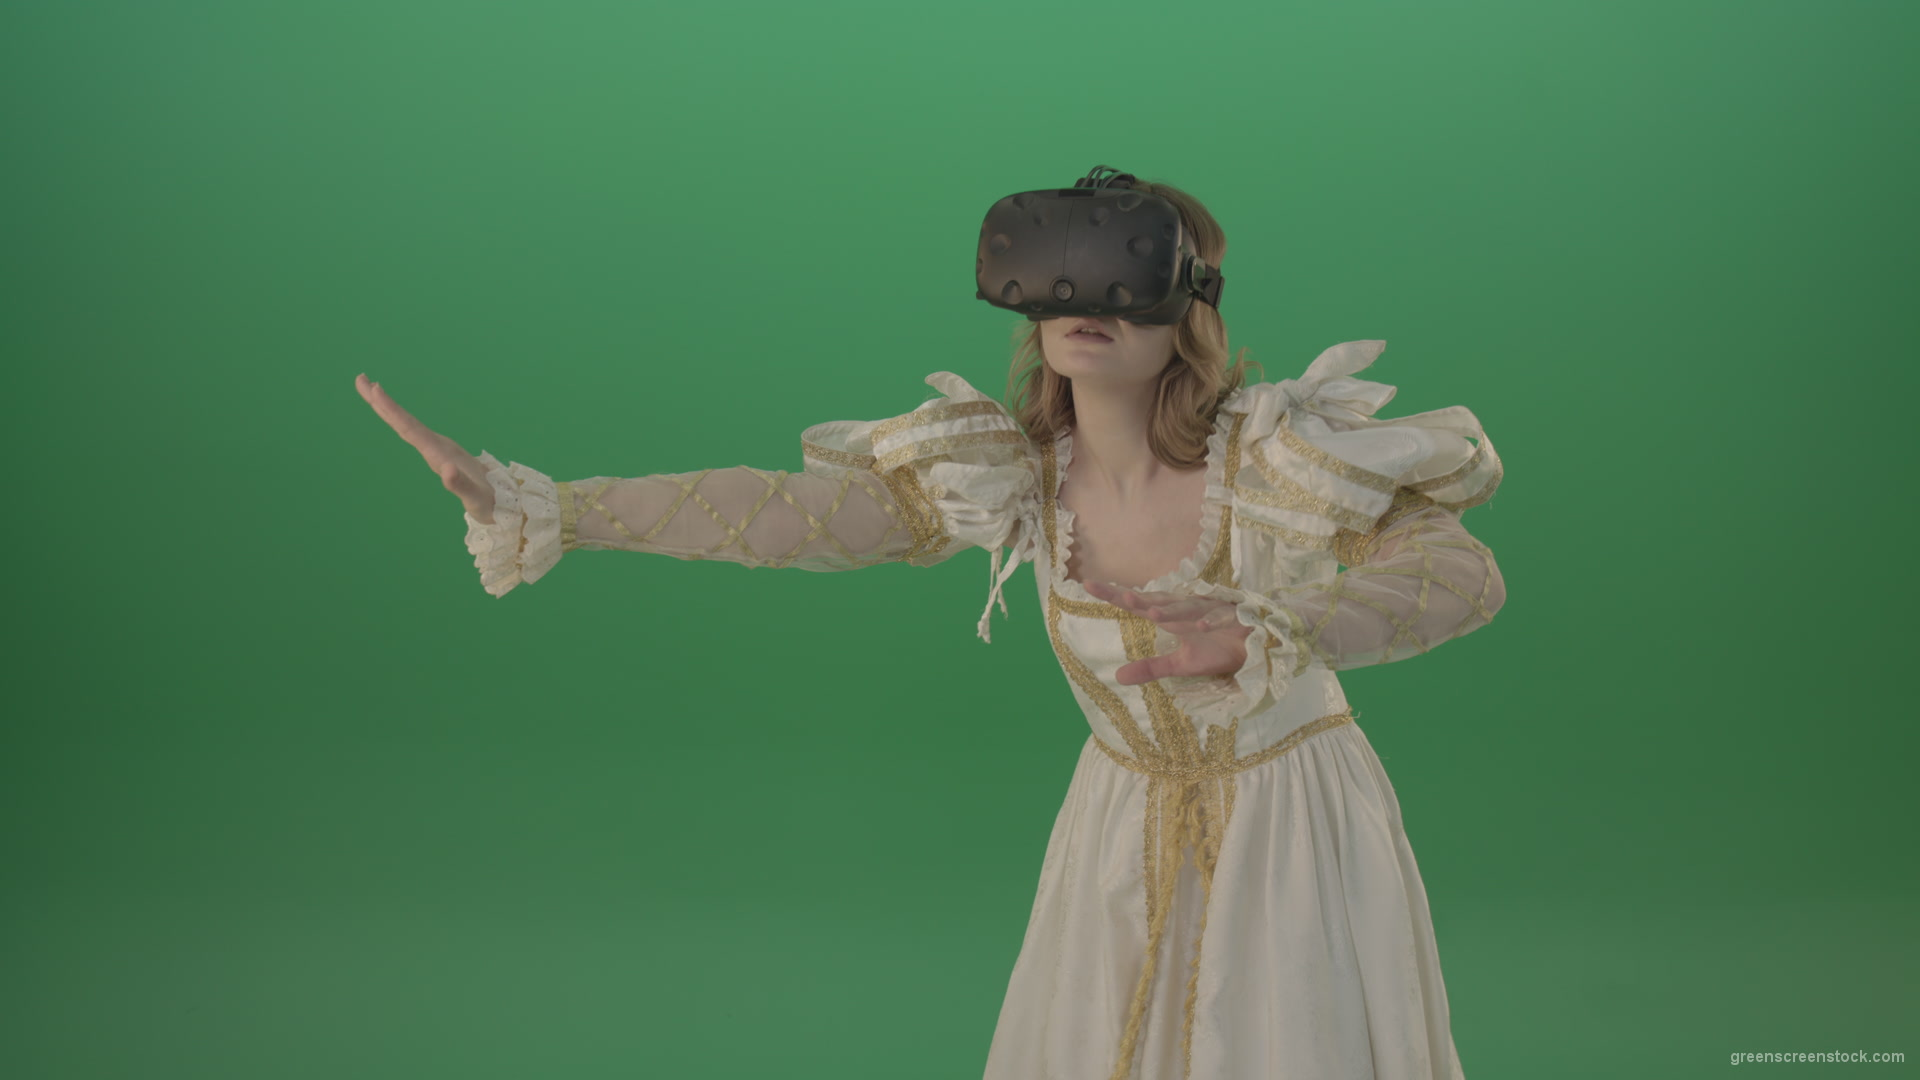 3d-glasses-of-virtual-reality-the-girl-looked-into-the-virtual-world-isolated-on-green-screen_005 Green Screen Stock